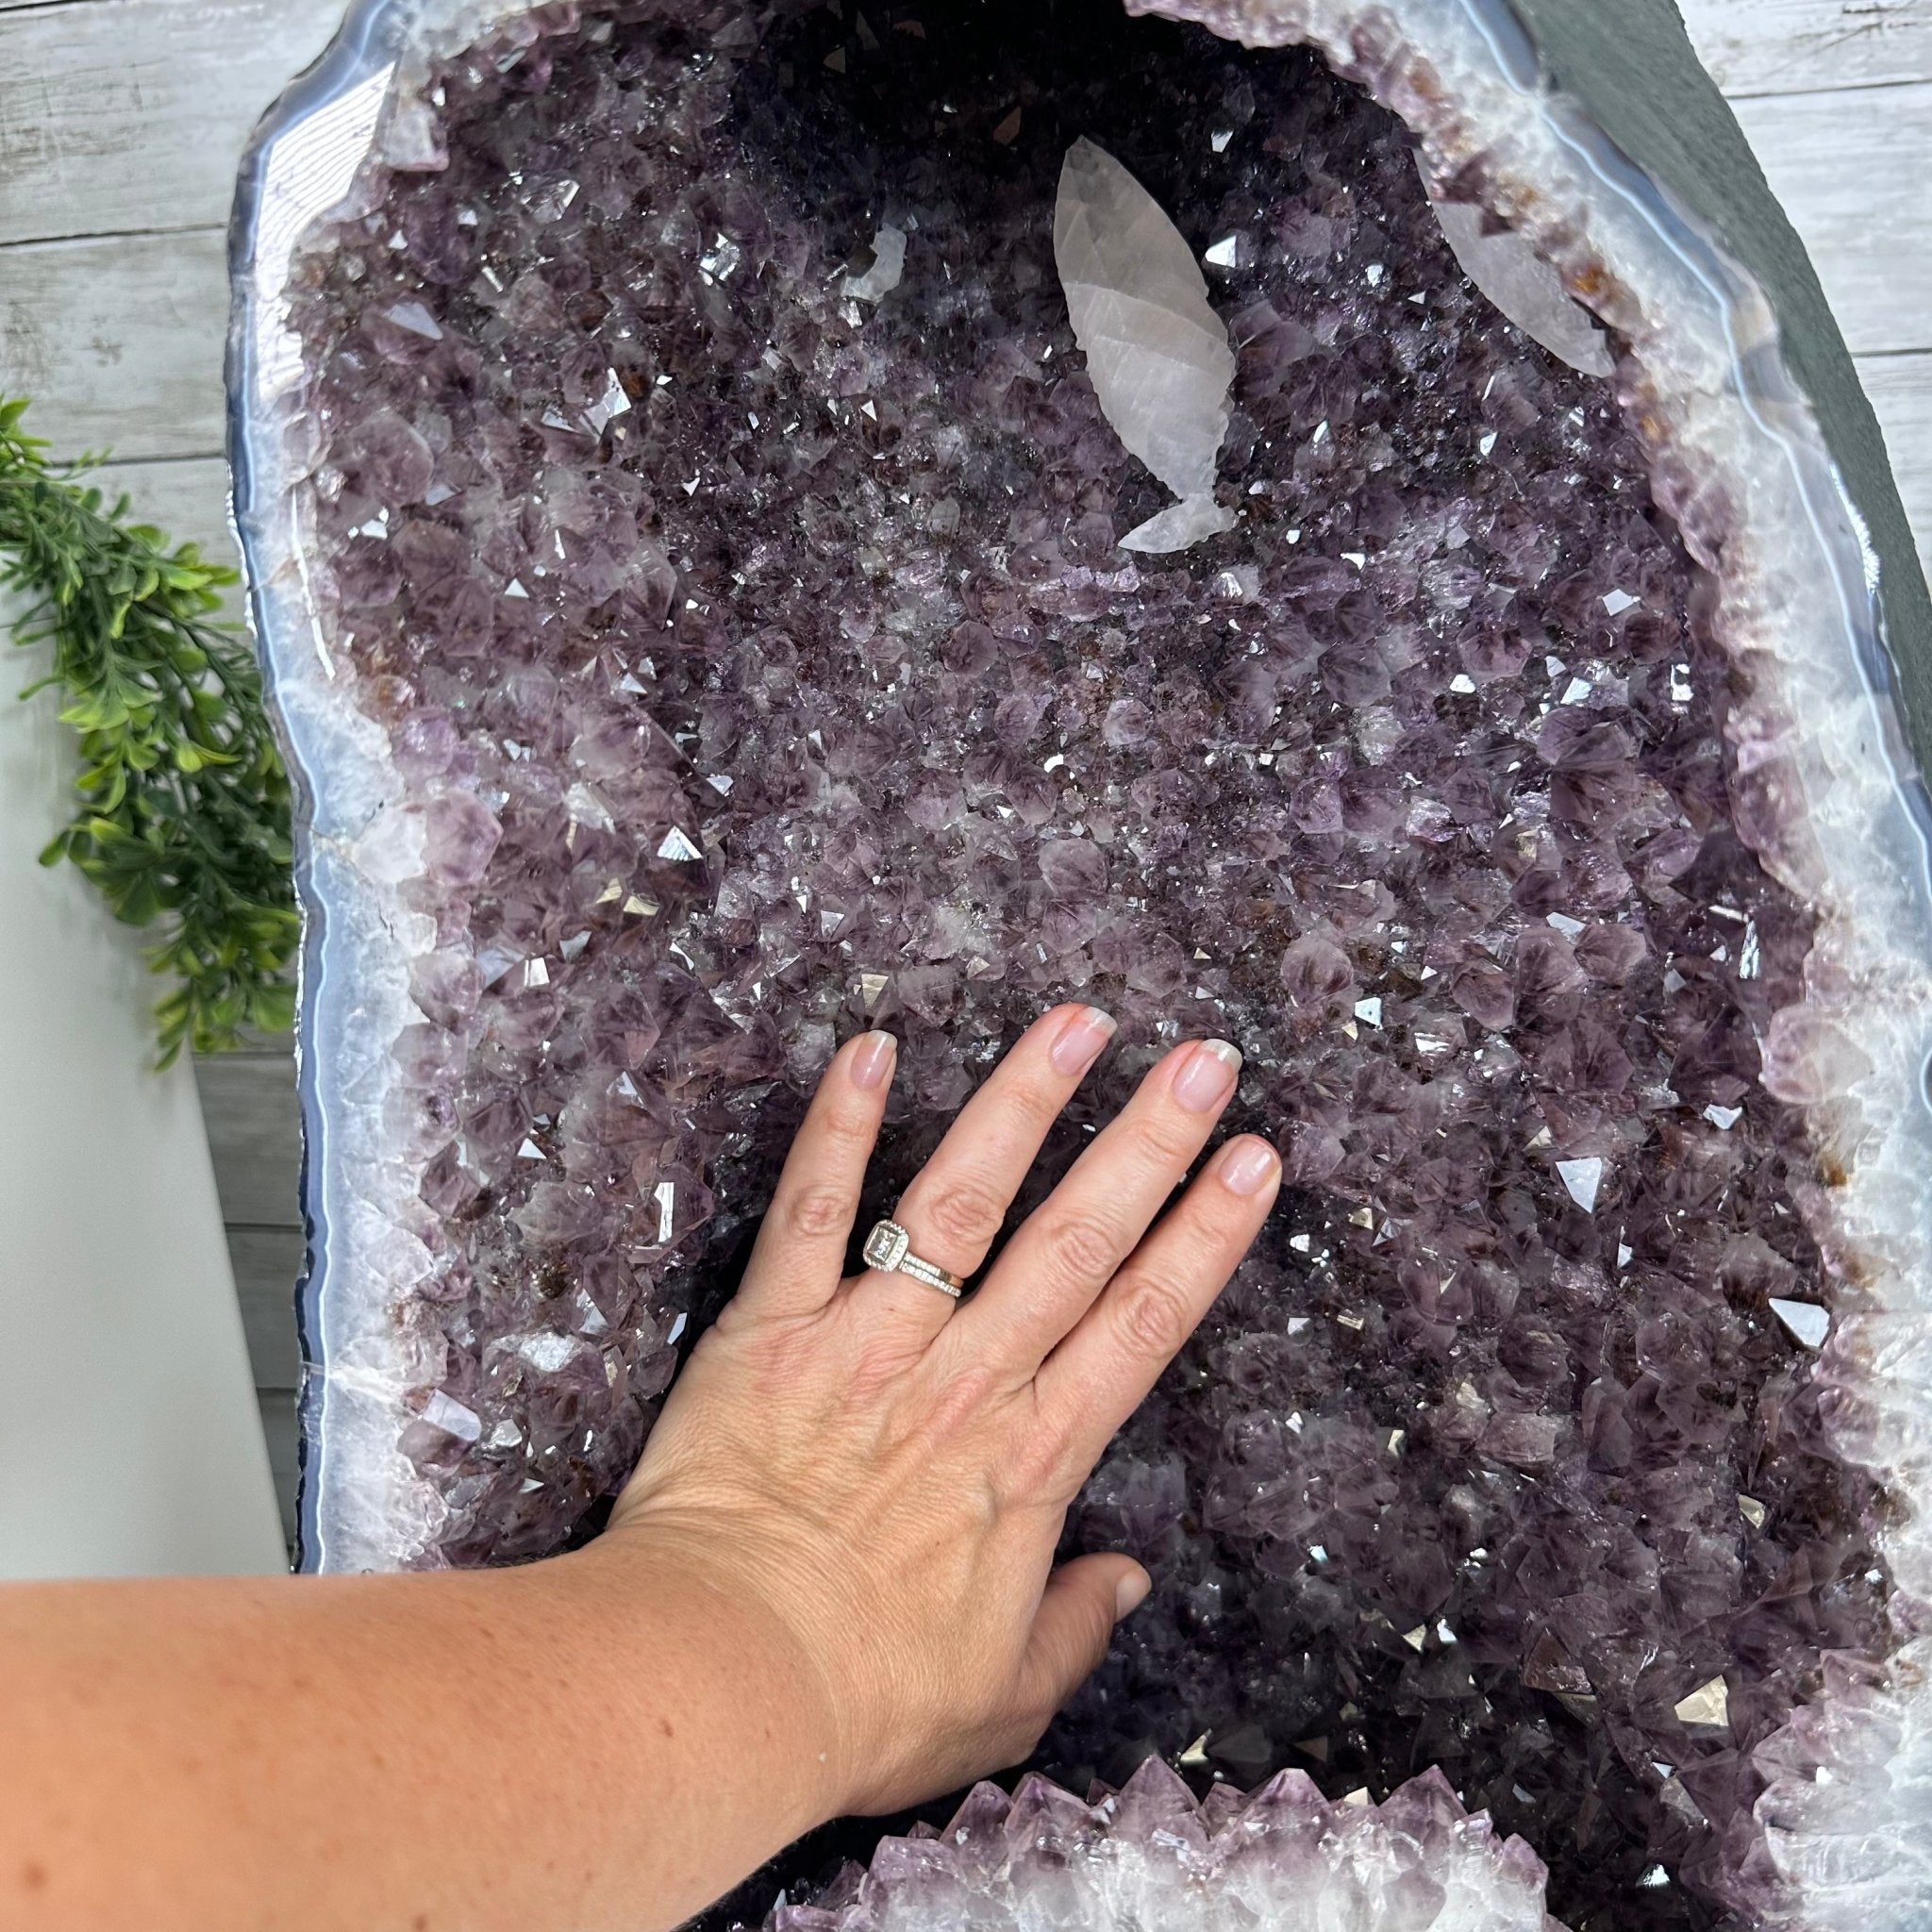 Extra Quality Brazilian Amethyst Cathedral, 85.6 lbs & 20.2” tall Model #5601-0741 by Brazil Gems - Brazil GemsBrazil GemsExtra Quality Brazilian Amethyst Cathedral, 85.6 lbs & 20.2” tall Model #5601-0741 by Brazil GemsCathedrals5601-0741